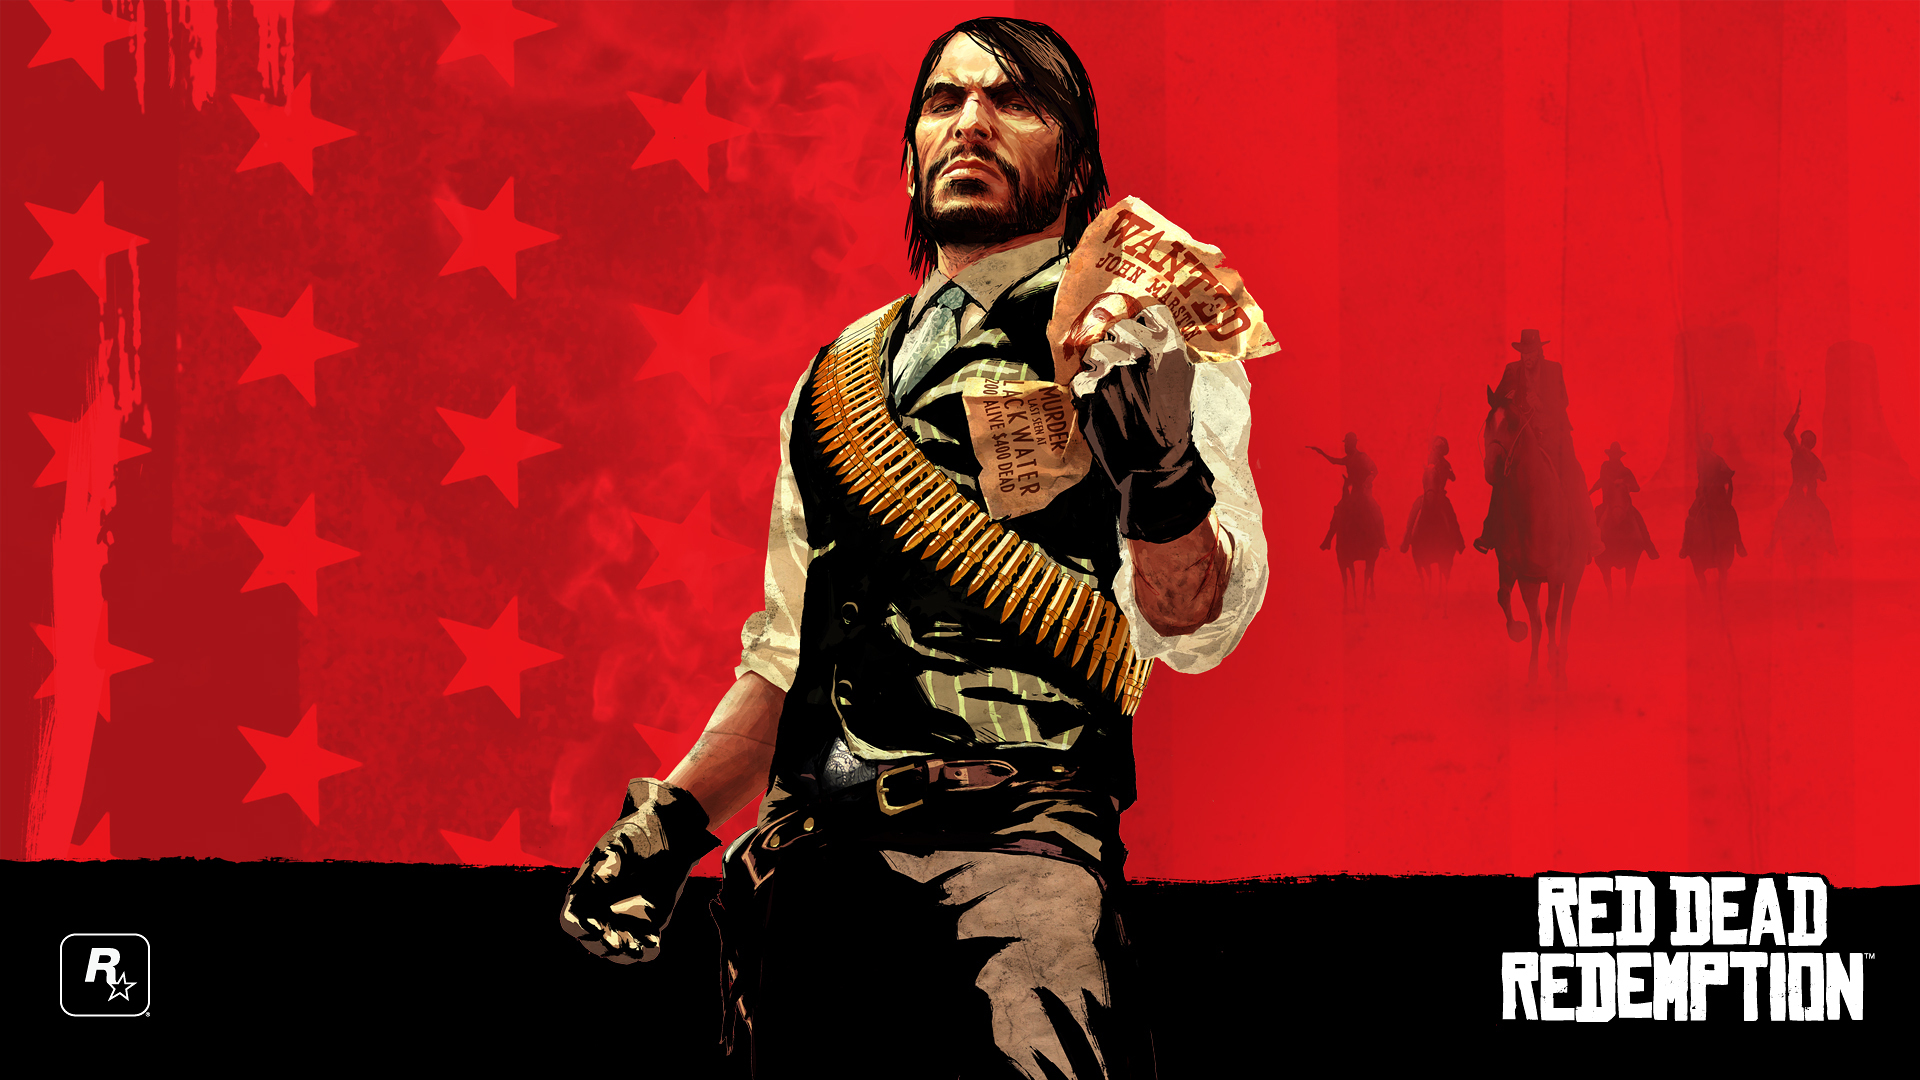 Red Dead Redemption Image John Marston Wanted HD